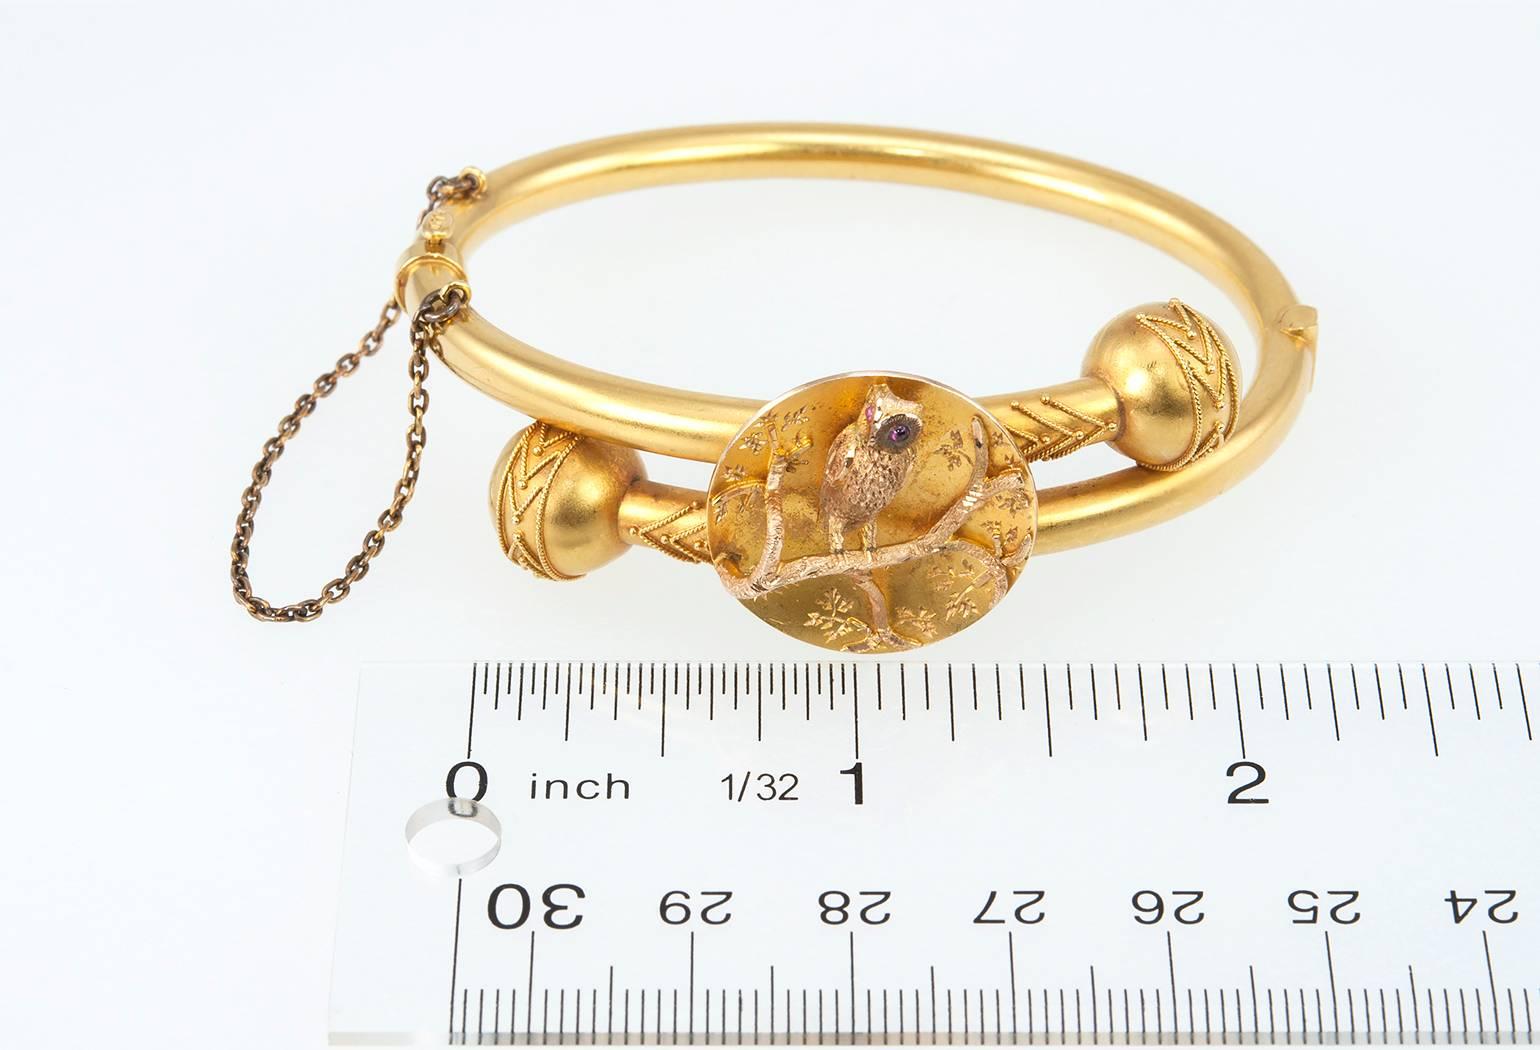 Victorian 14 karat yellow gold bangle bracelet in a beautiful matte gold finish.  The bracelet features an owl with 2 cabochon ruby eyes that is perched on a tree branch. Circa 1890s-1900s.
The bracelet measures approximately 6.5 inches in the